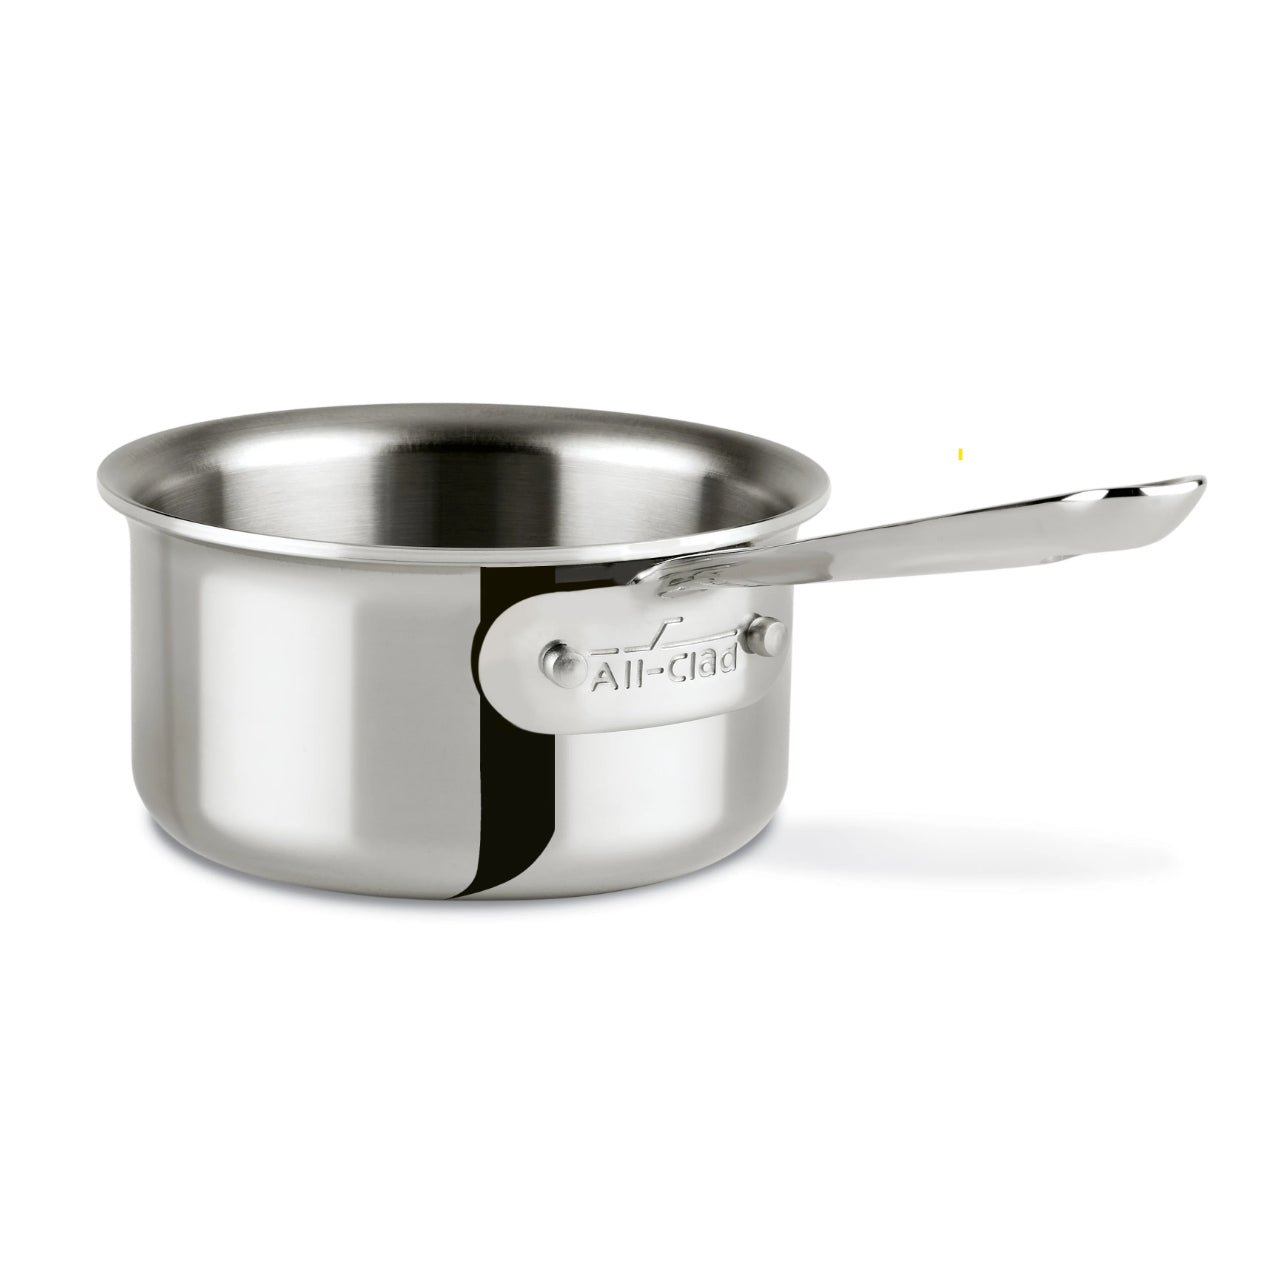 All-Clad Stainless Steel 1/2 qt. Butter Warmer